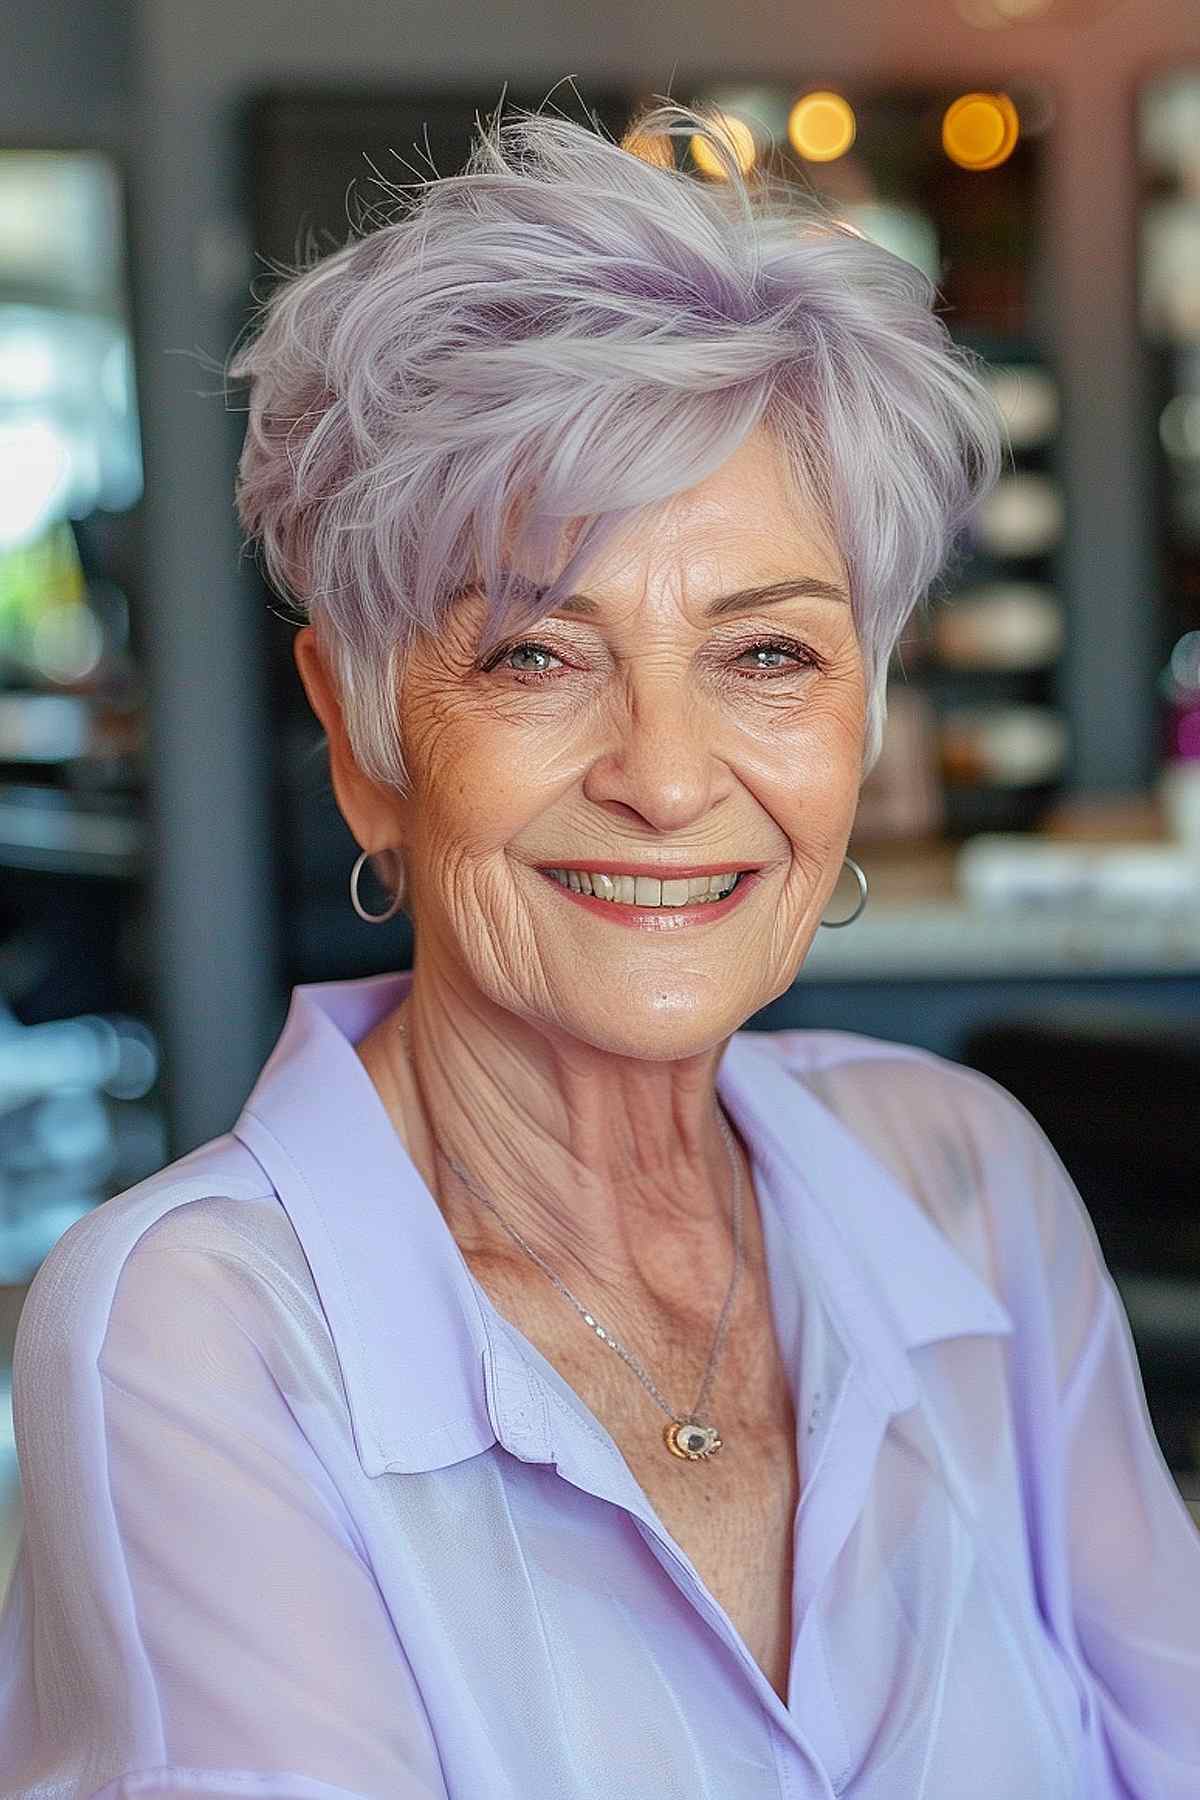 Elf haircut for older women with soft lavender hue and tousled layers.